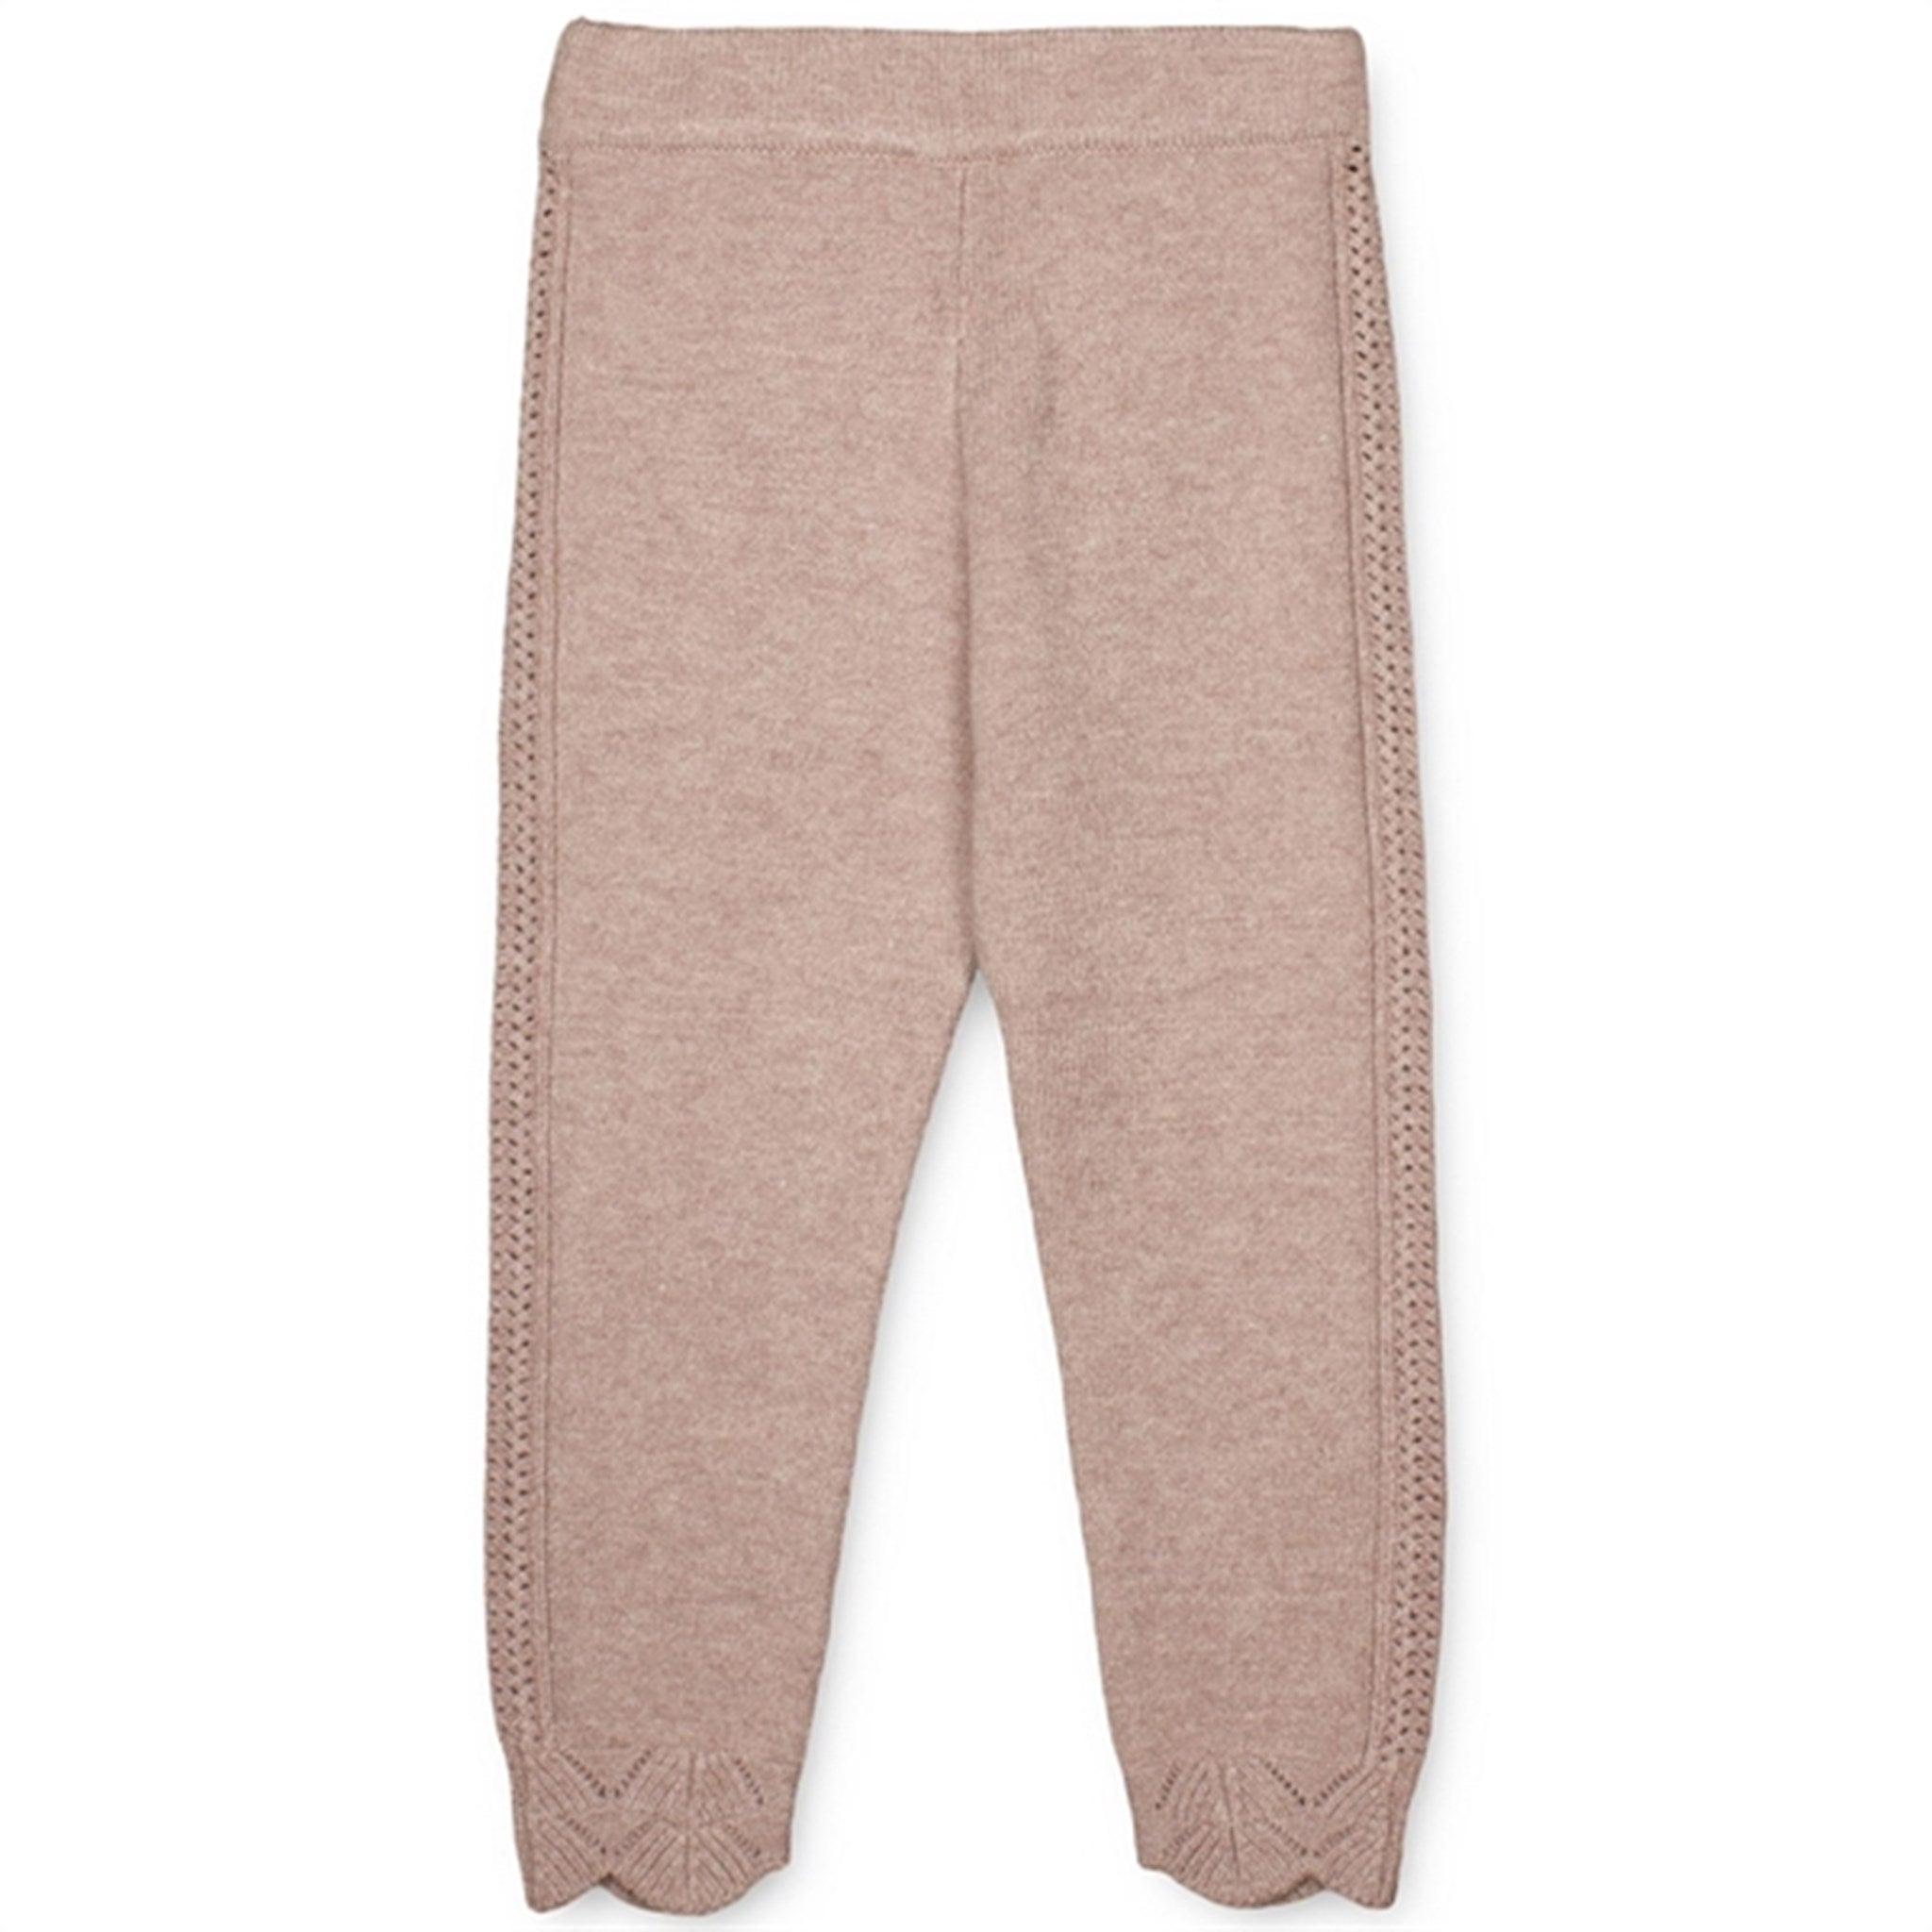 FLIINK Sphinx Lilly Knit Pants 2